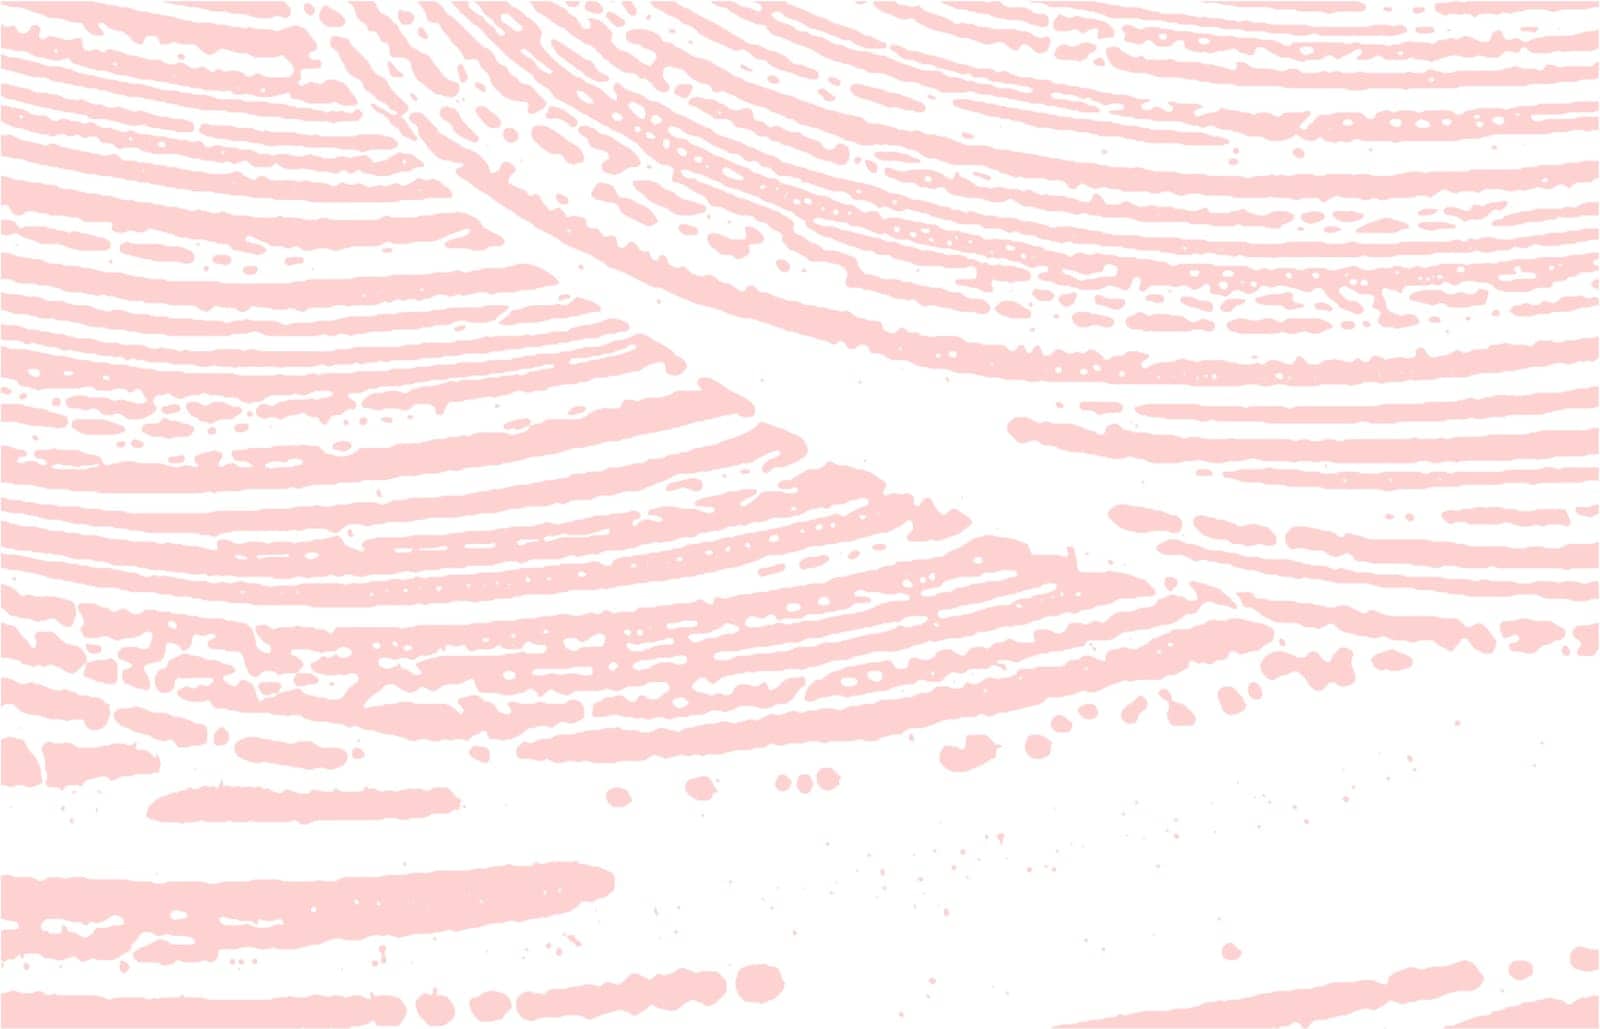 Grunge texture. Distress pink rough trace. Graceful background. Noise dirty grunge texture. Exotic artistic surface. Vector illustration.